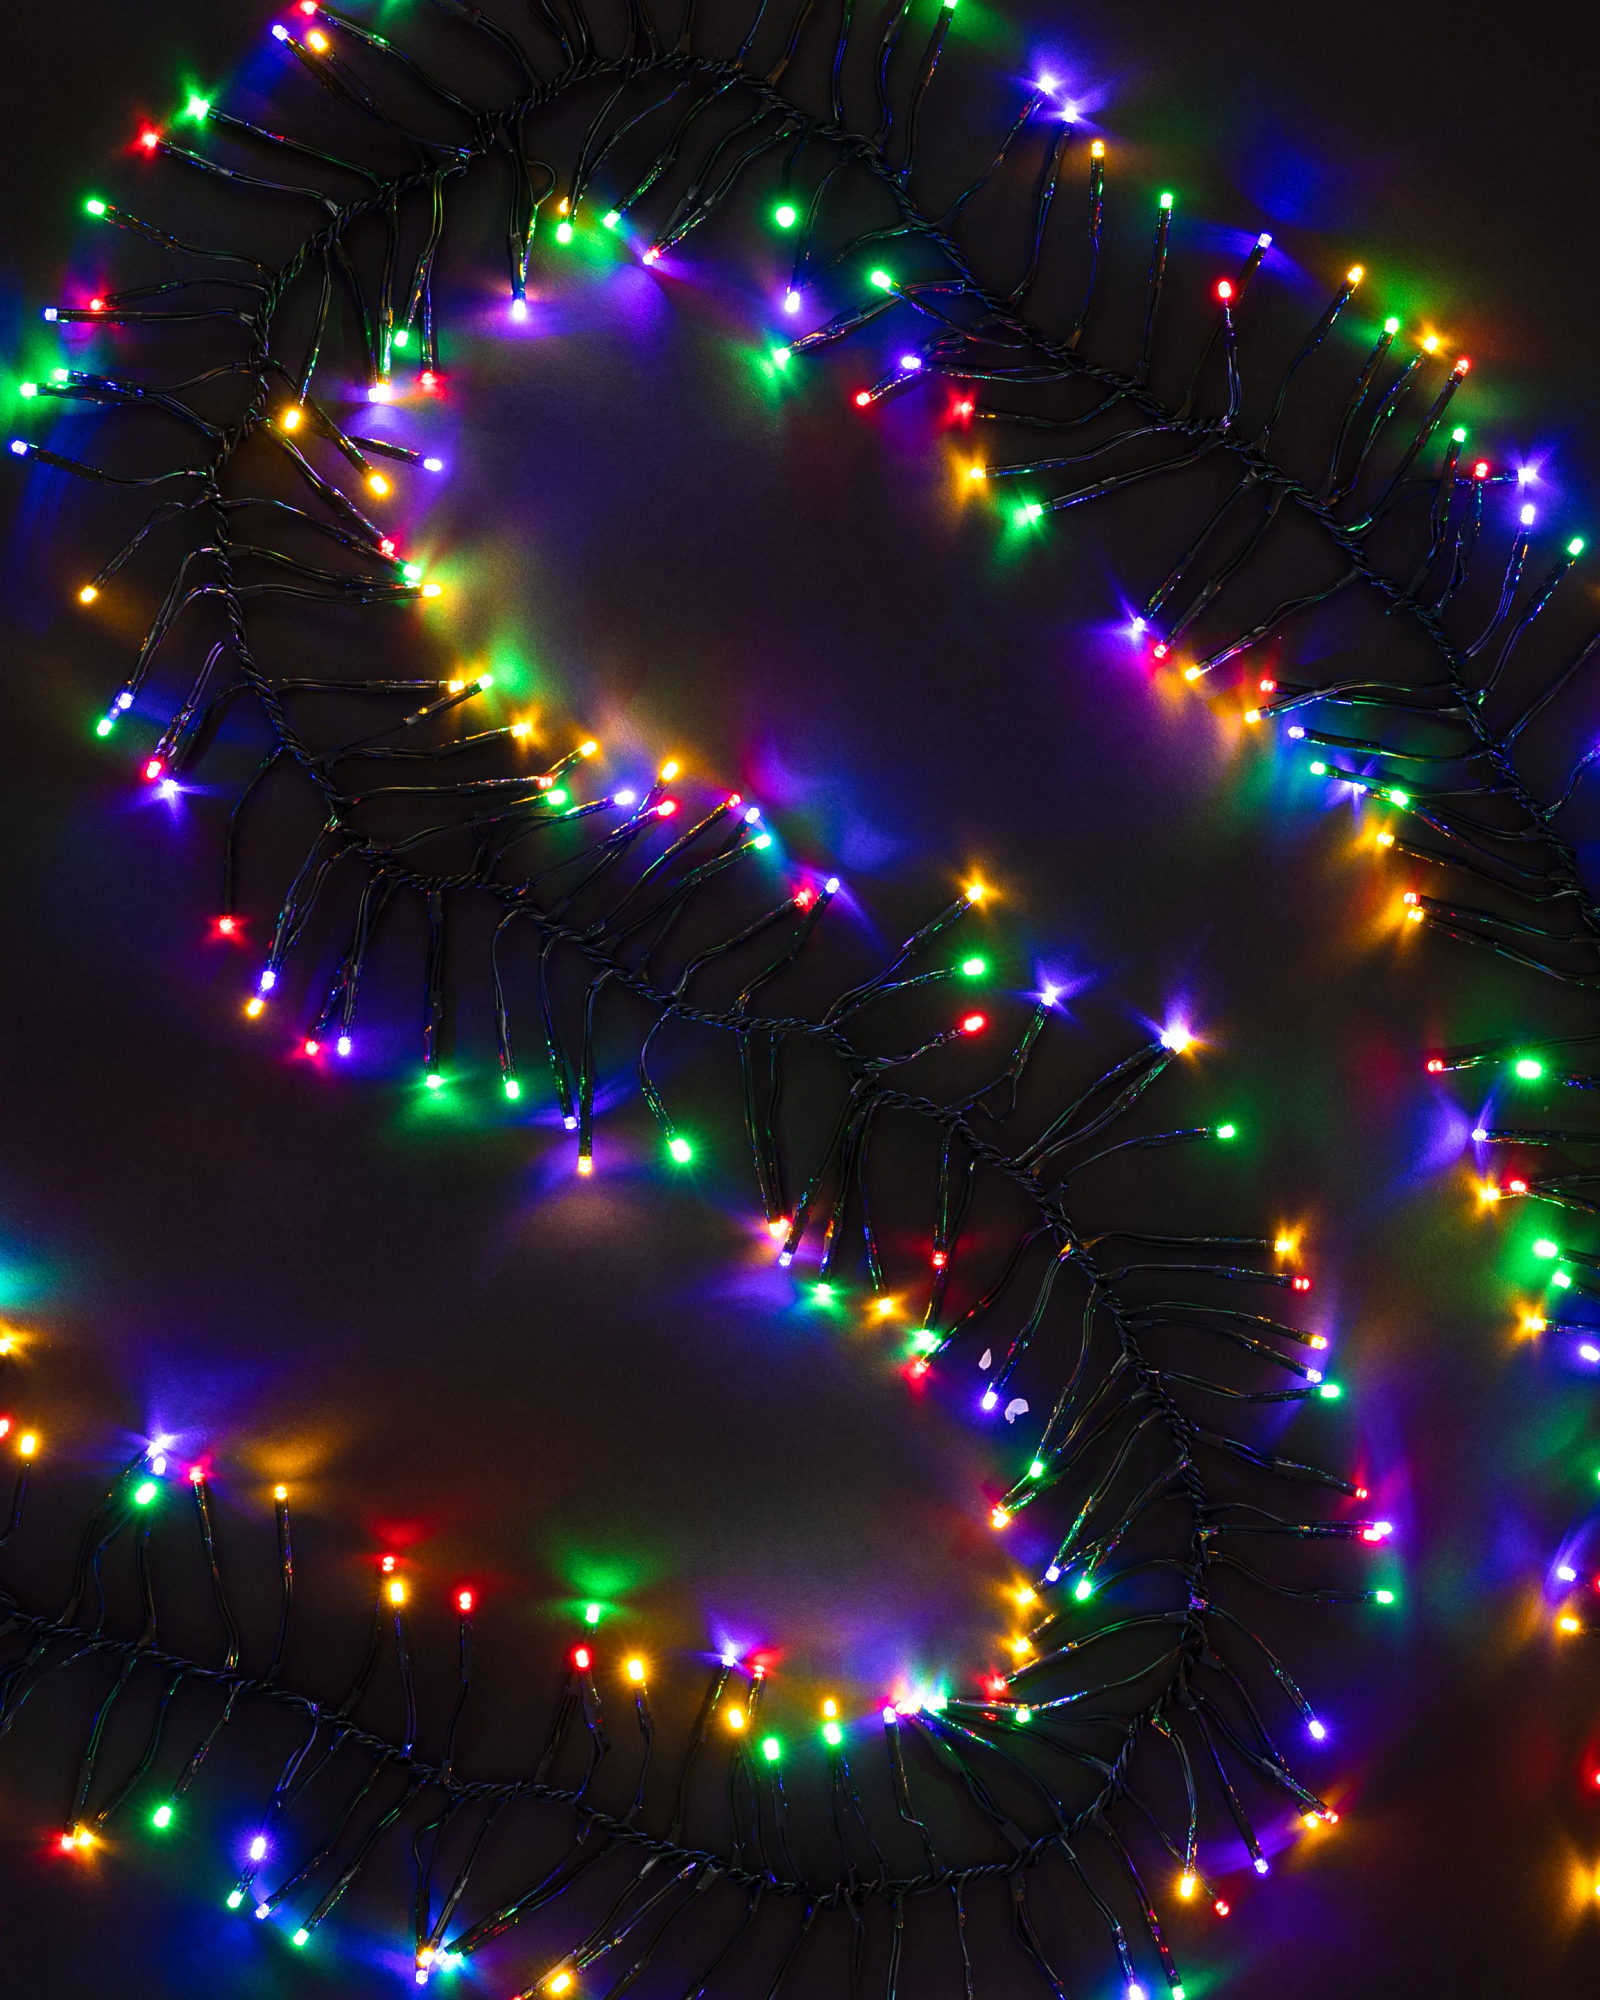 https://source.widen.net/content/ast7lcmrbh/jpeg/CDL-1941001_19.5-feet-Multicolor-Cluster-Micro-LED-Light-String_SSC.jpeg?w=1600&h=2000&keep=c&crop=yes&color=cccccc&quality=100&u=7mzq6p